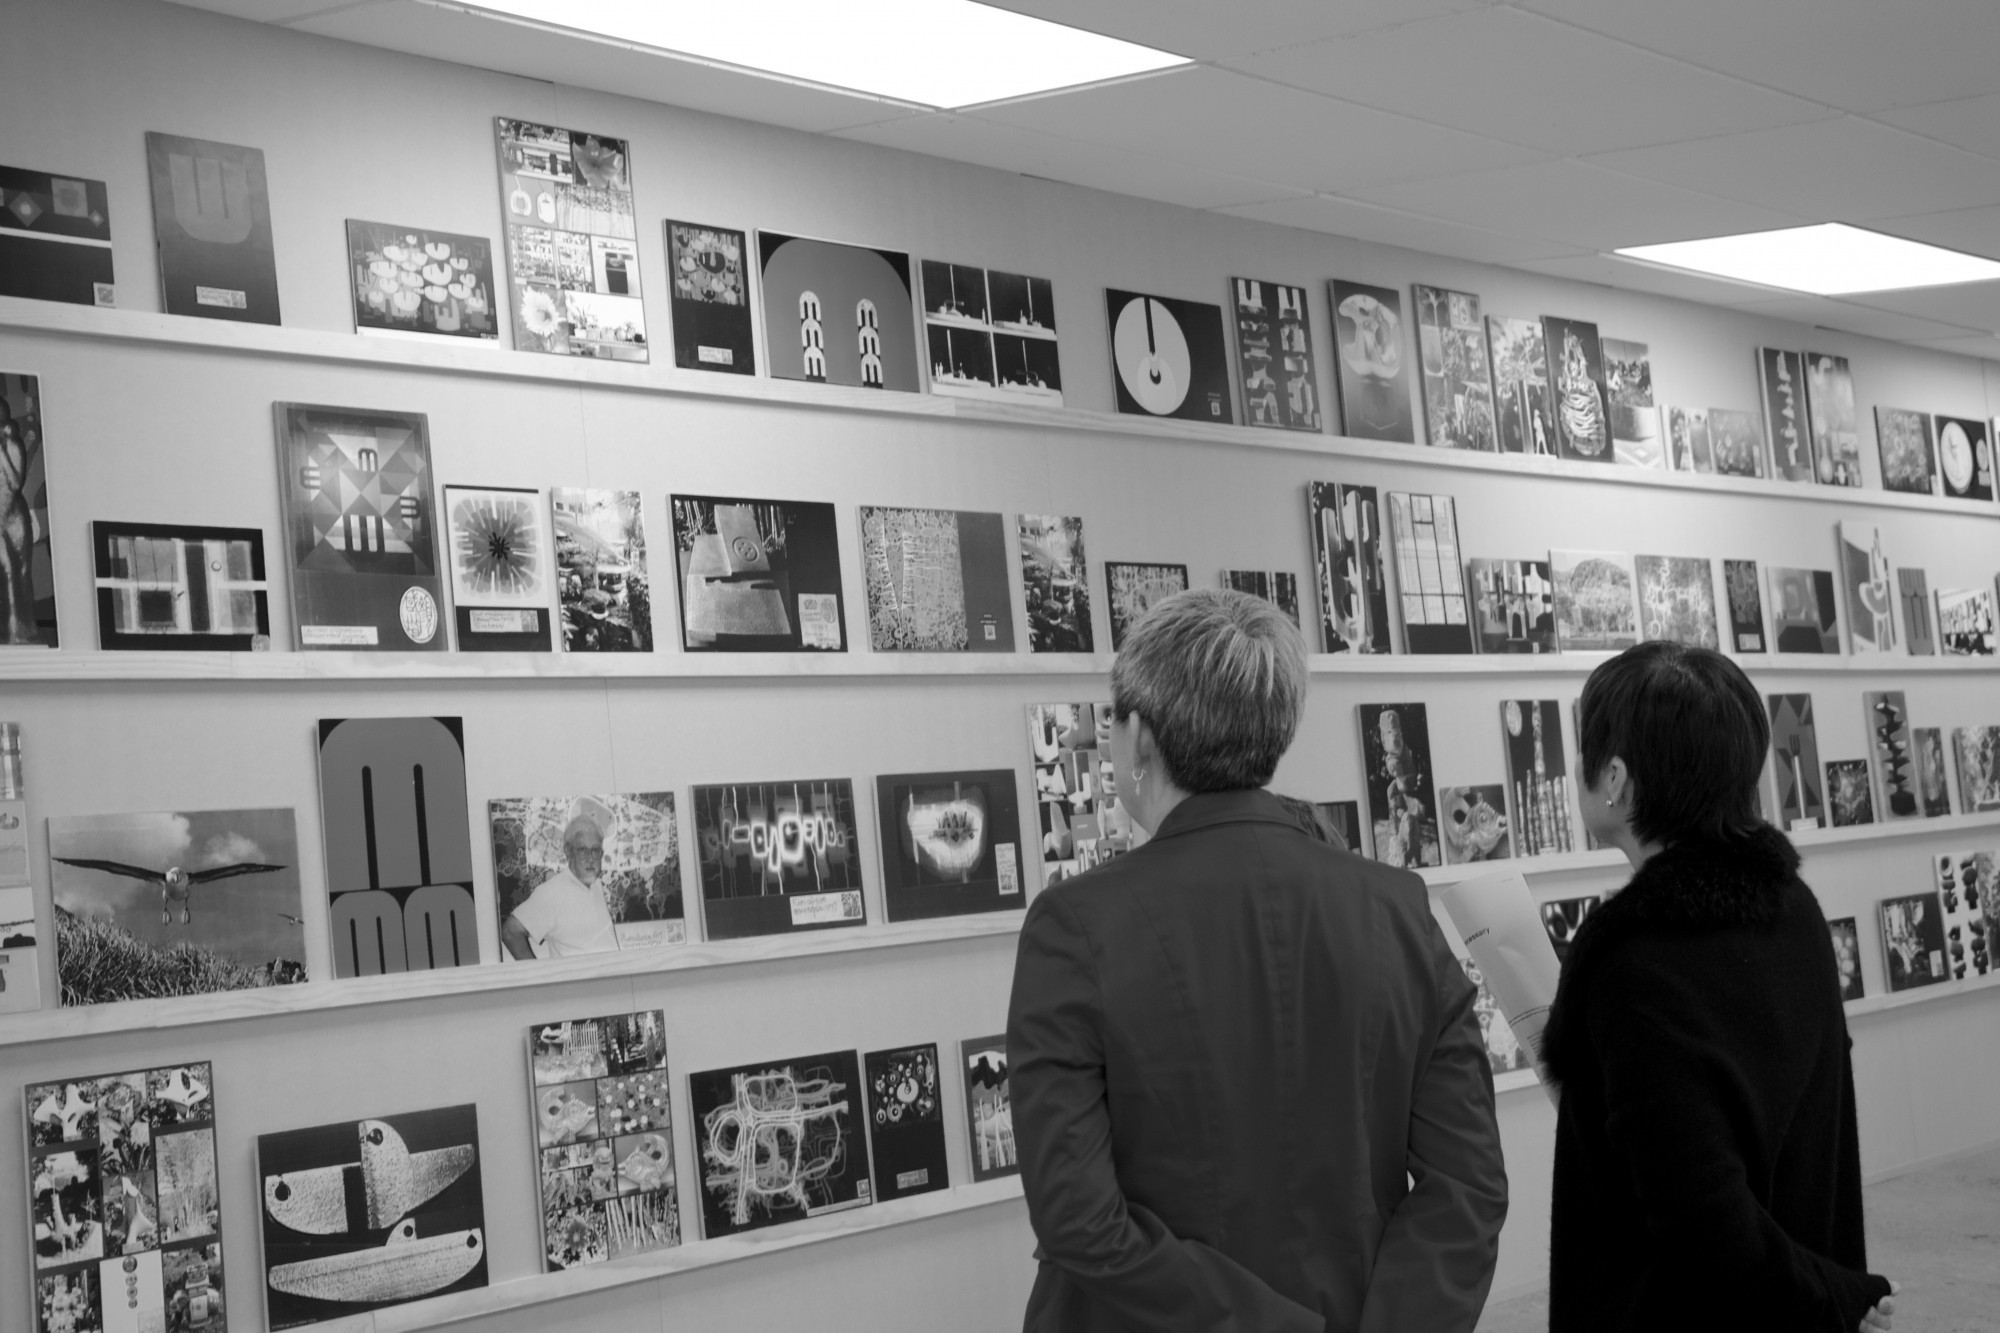 Two women with their back to us stand looking at shelves with photos of works by Guy Ngan laid along them.